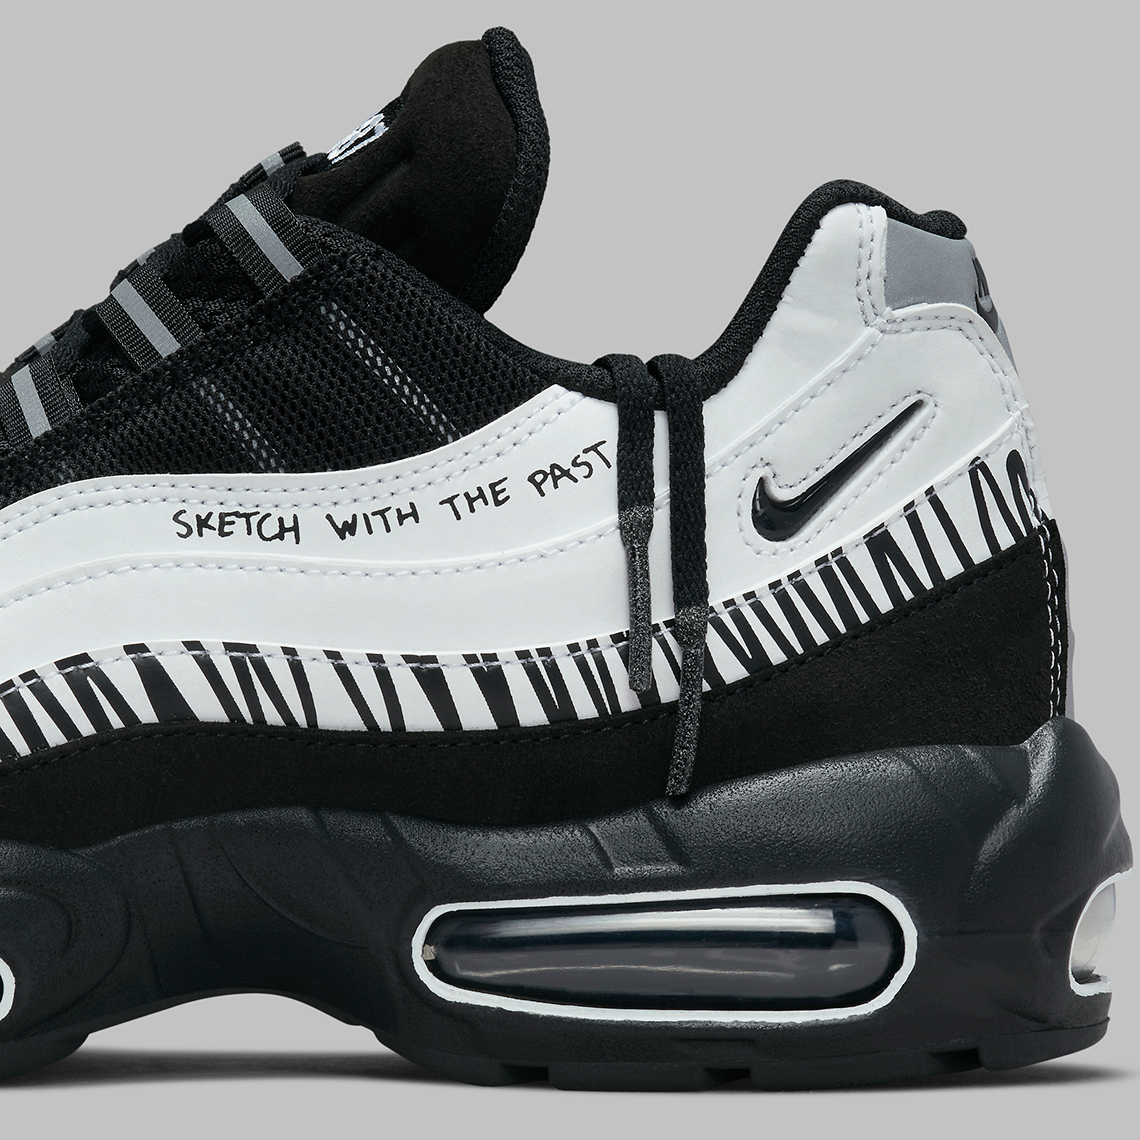 nike air max 95 sketch with the past dx4615 100 4